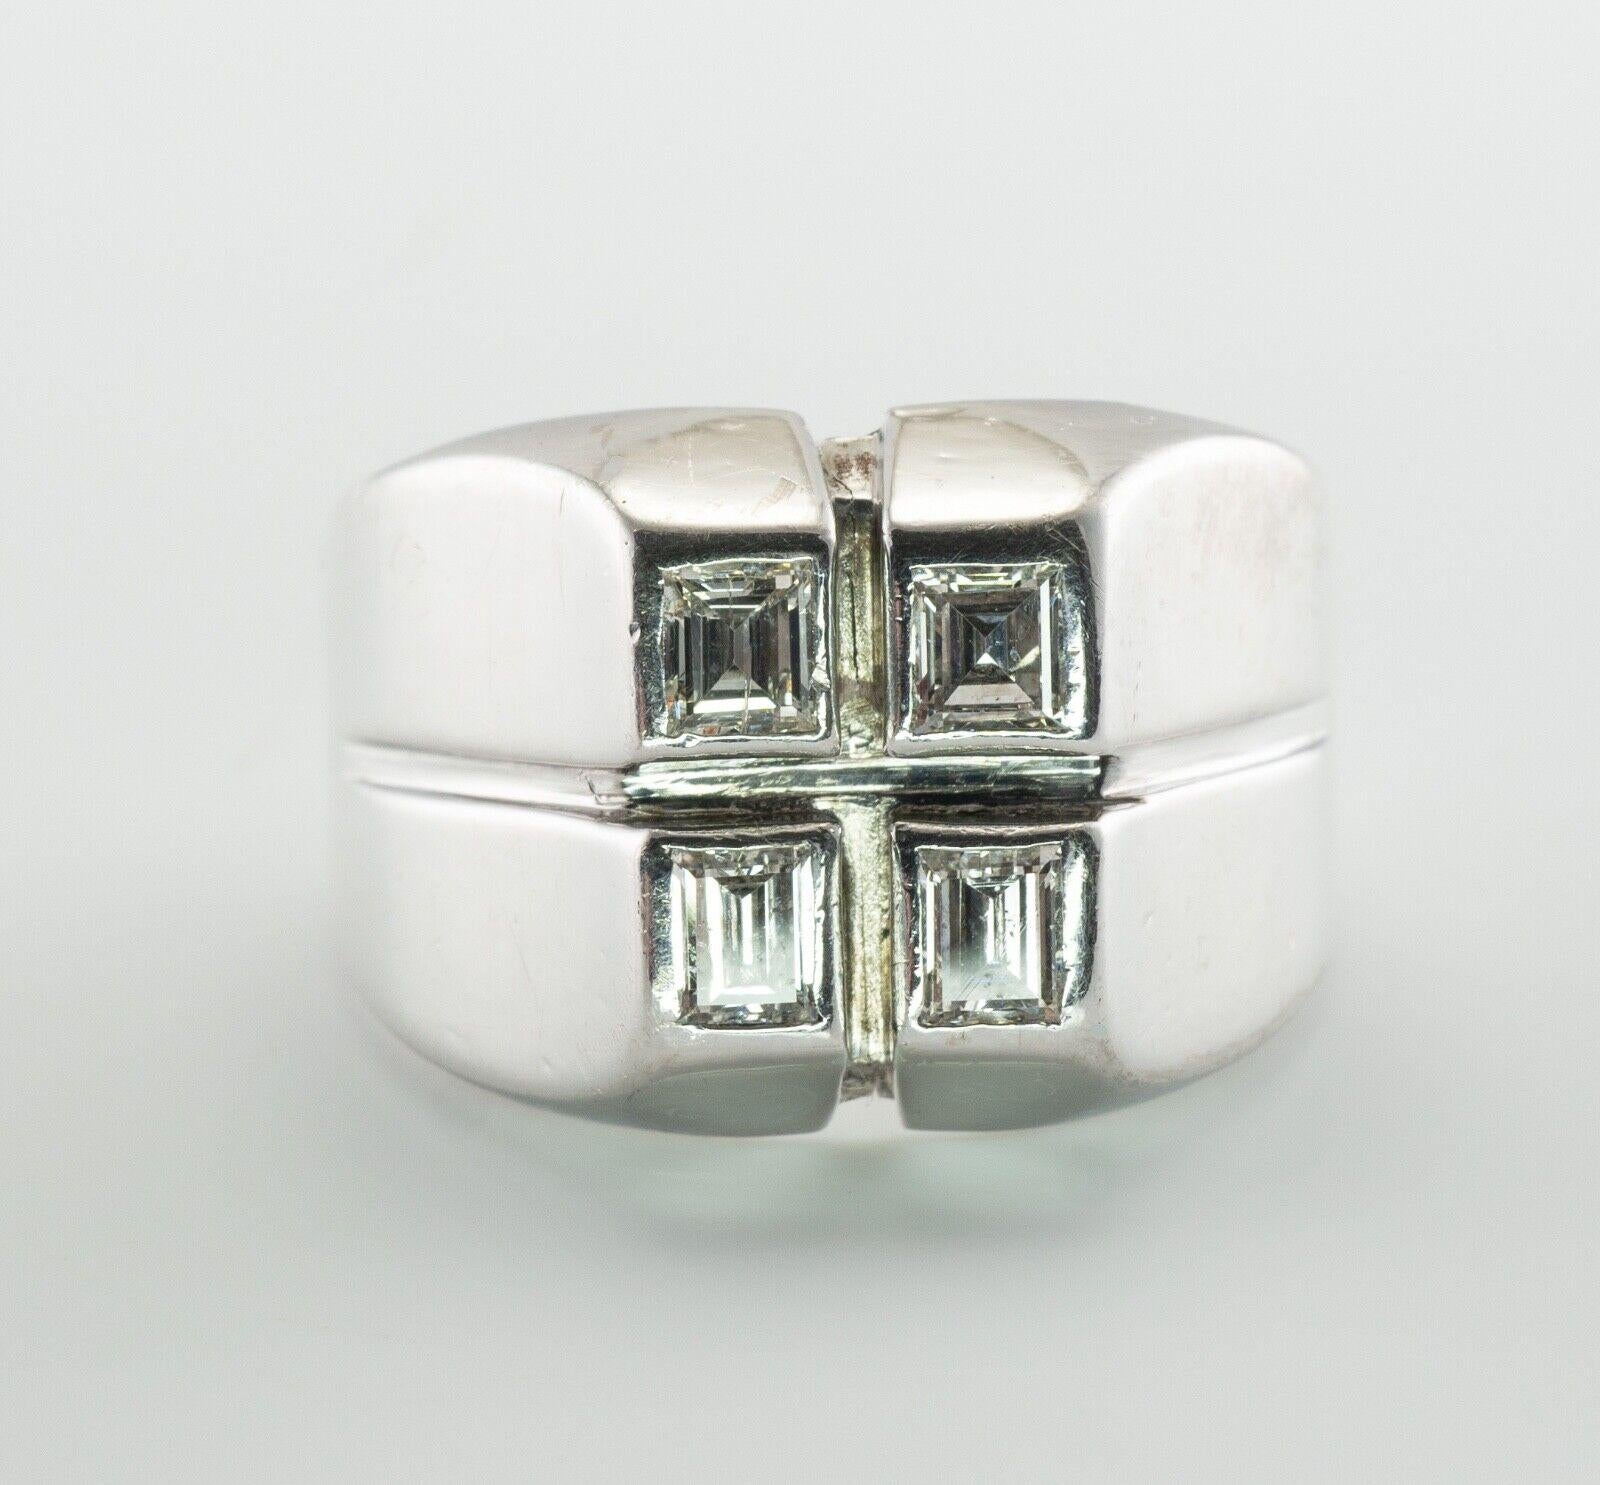 Emerald Cut Mens Diamond Ring Square Cut 14K White Gold Band .80 TDW For Sale